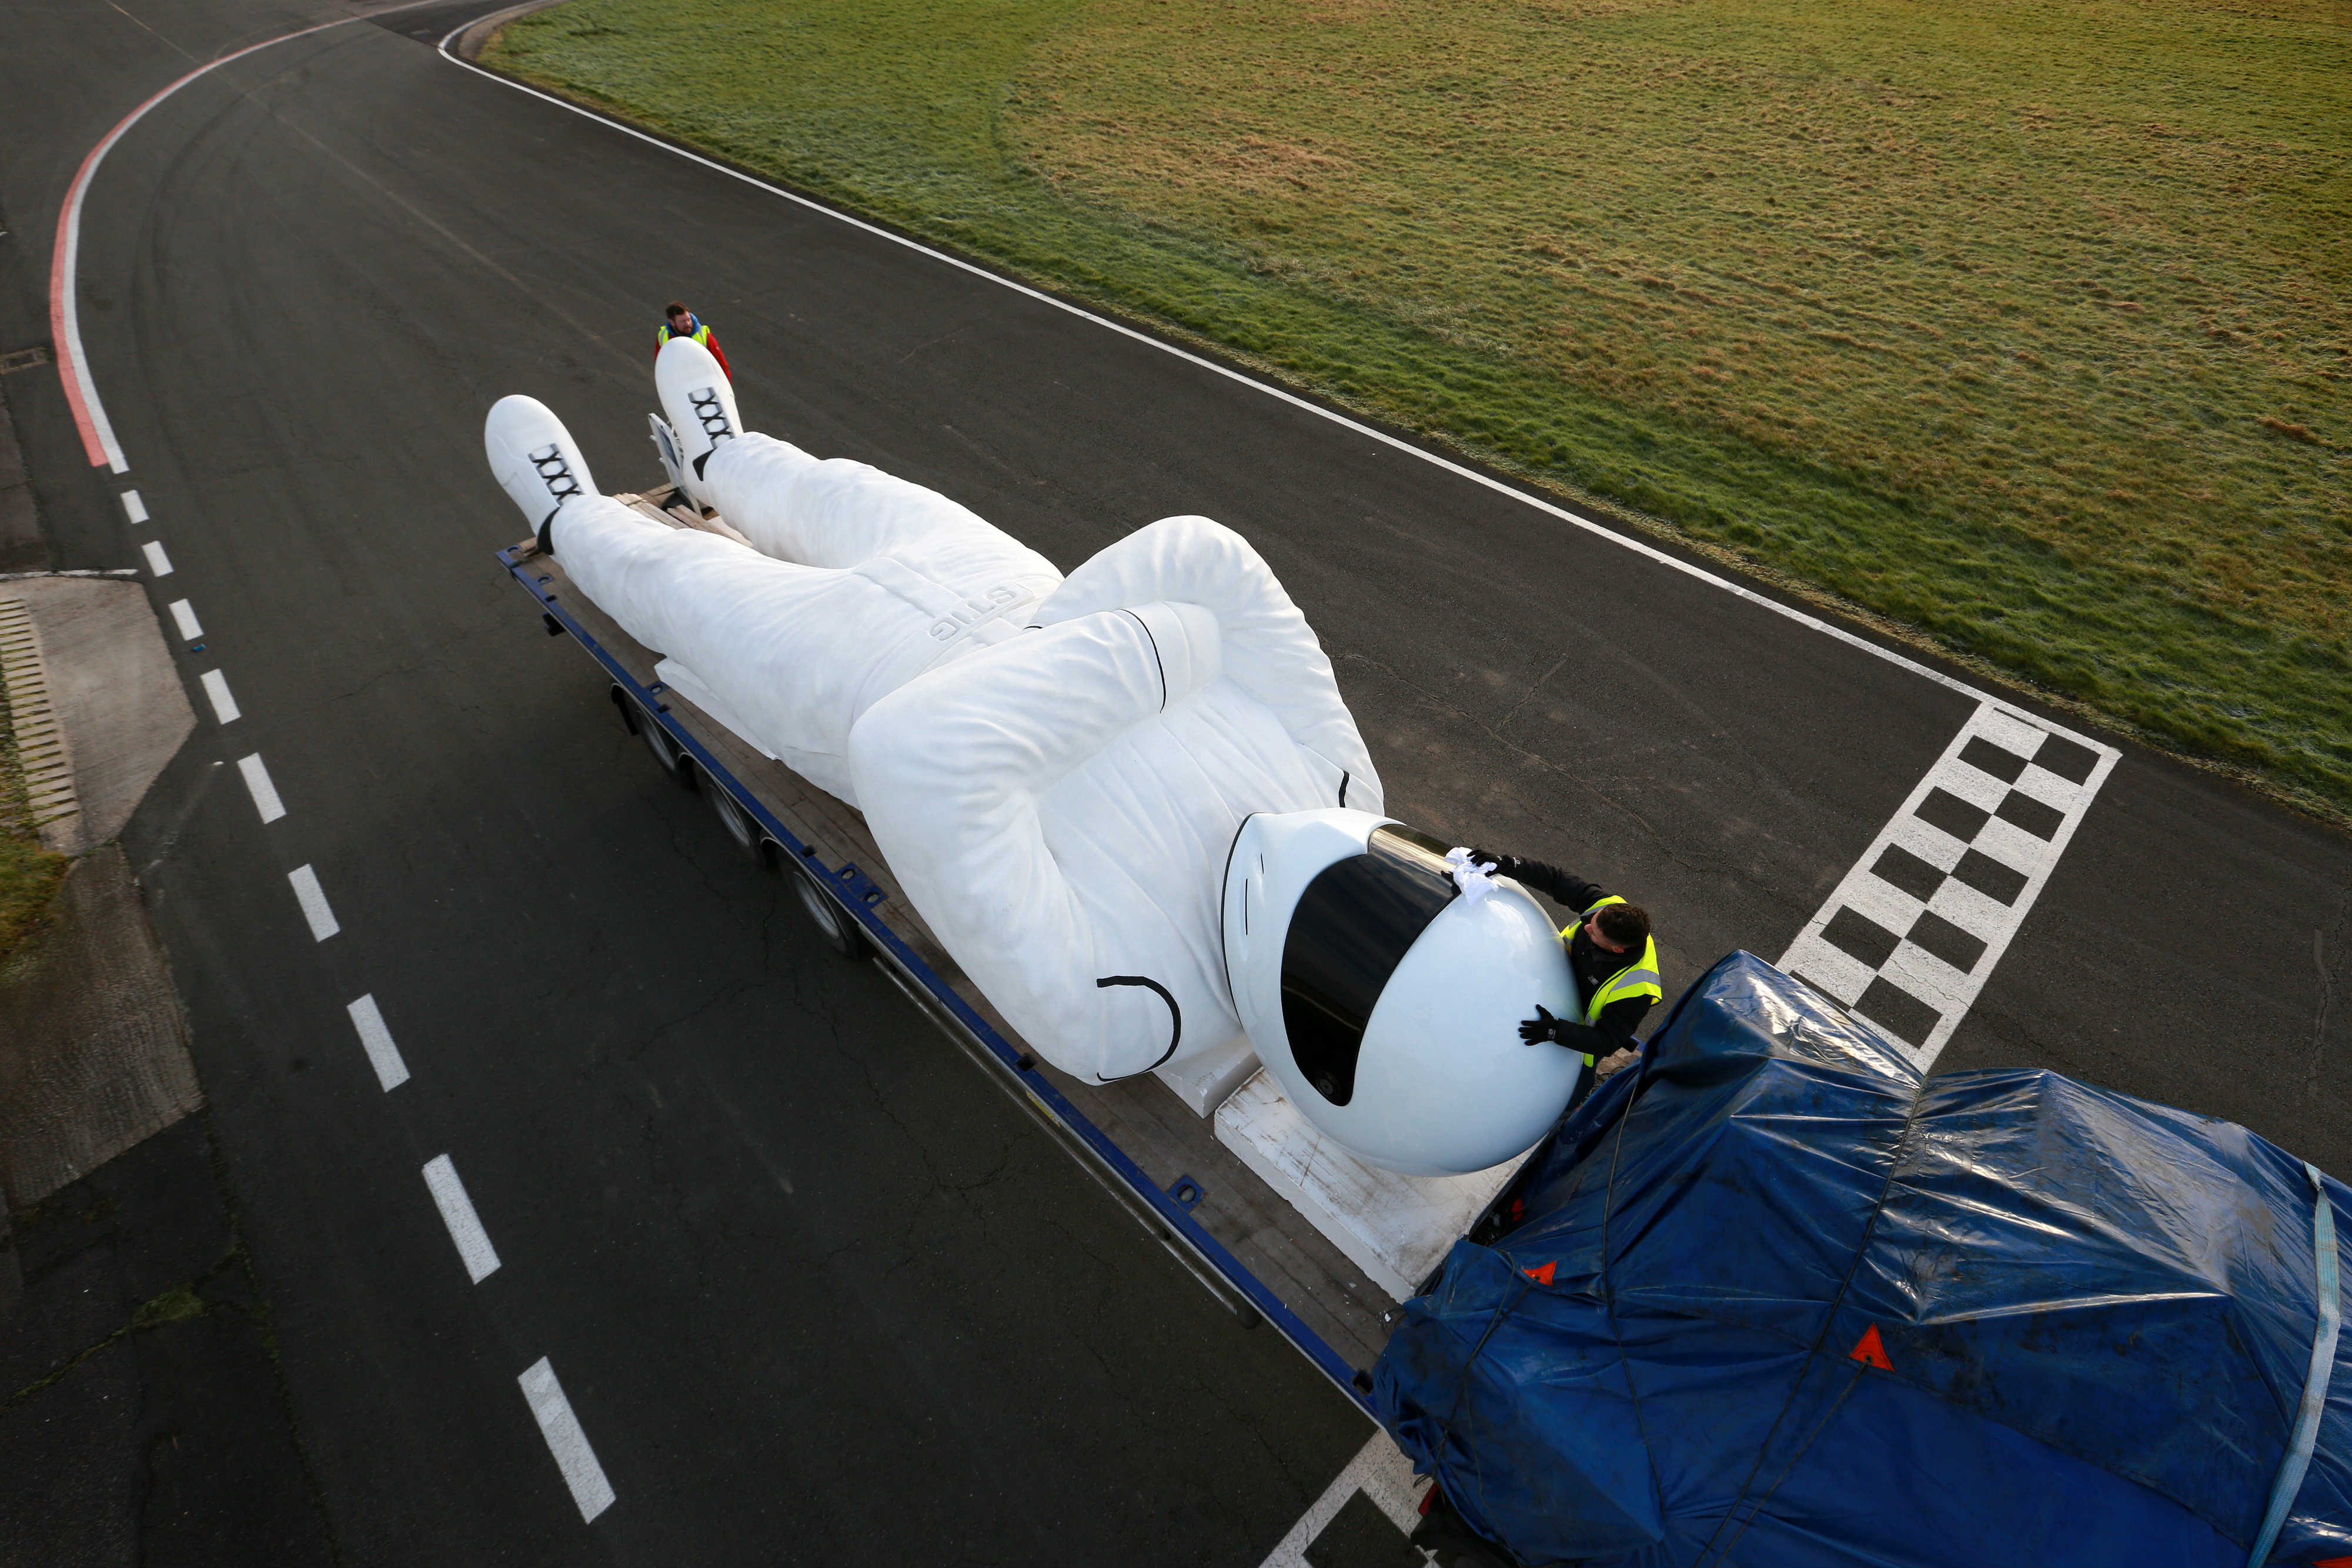 Big Stig being cleaned at Top Gear test track